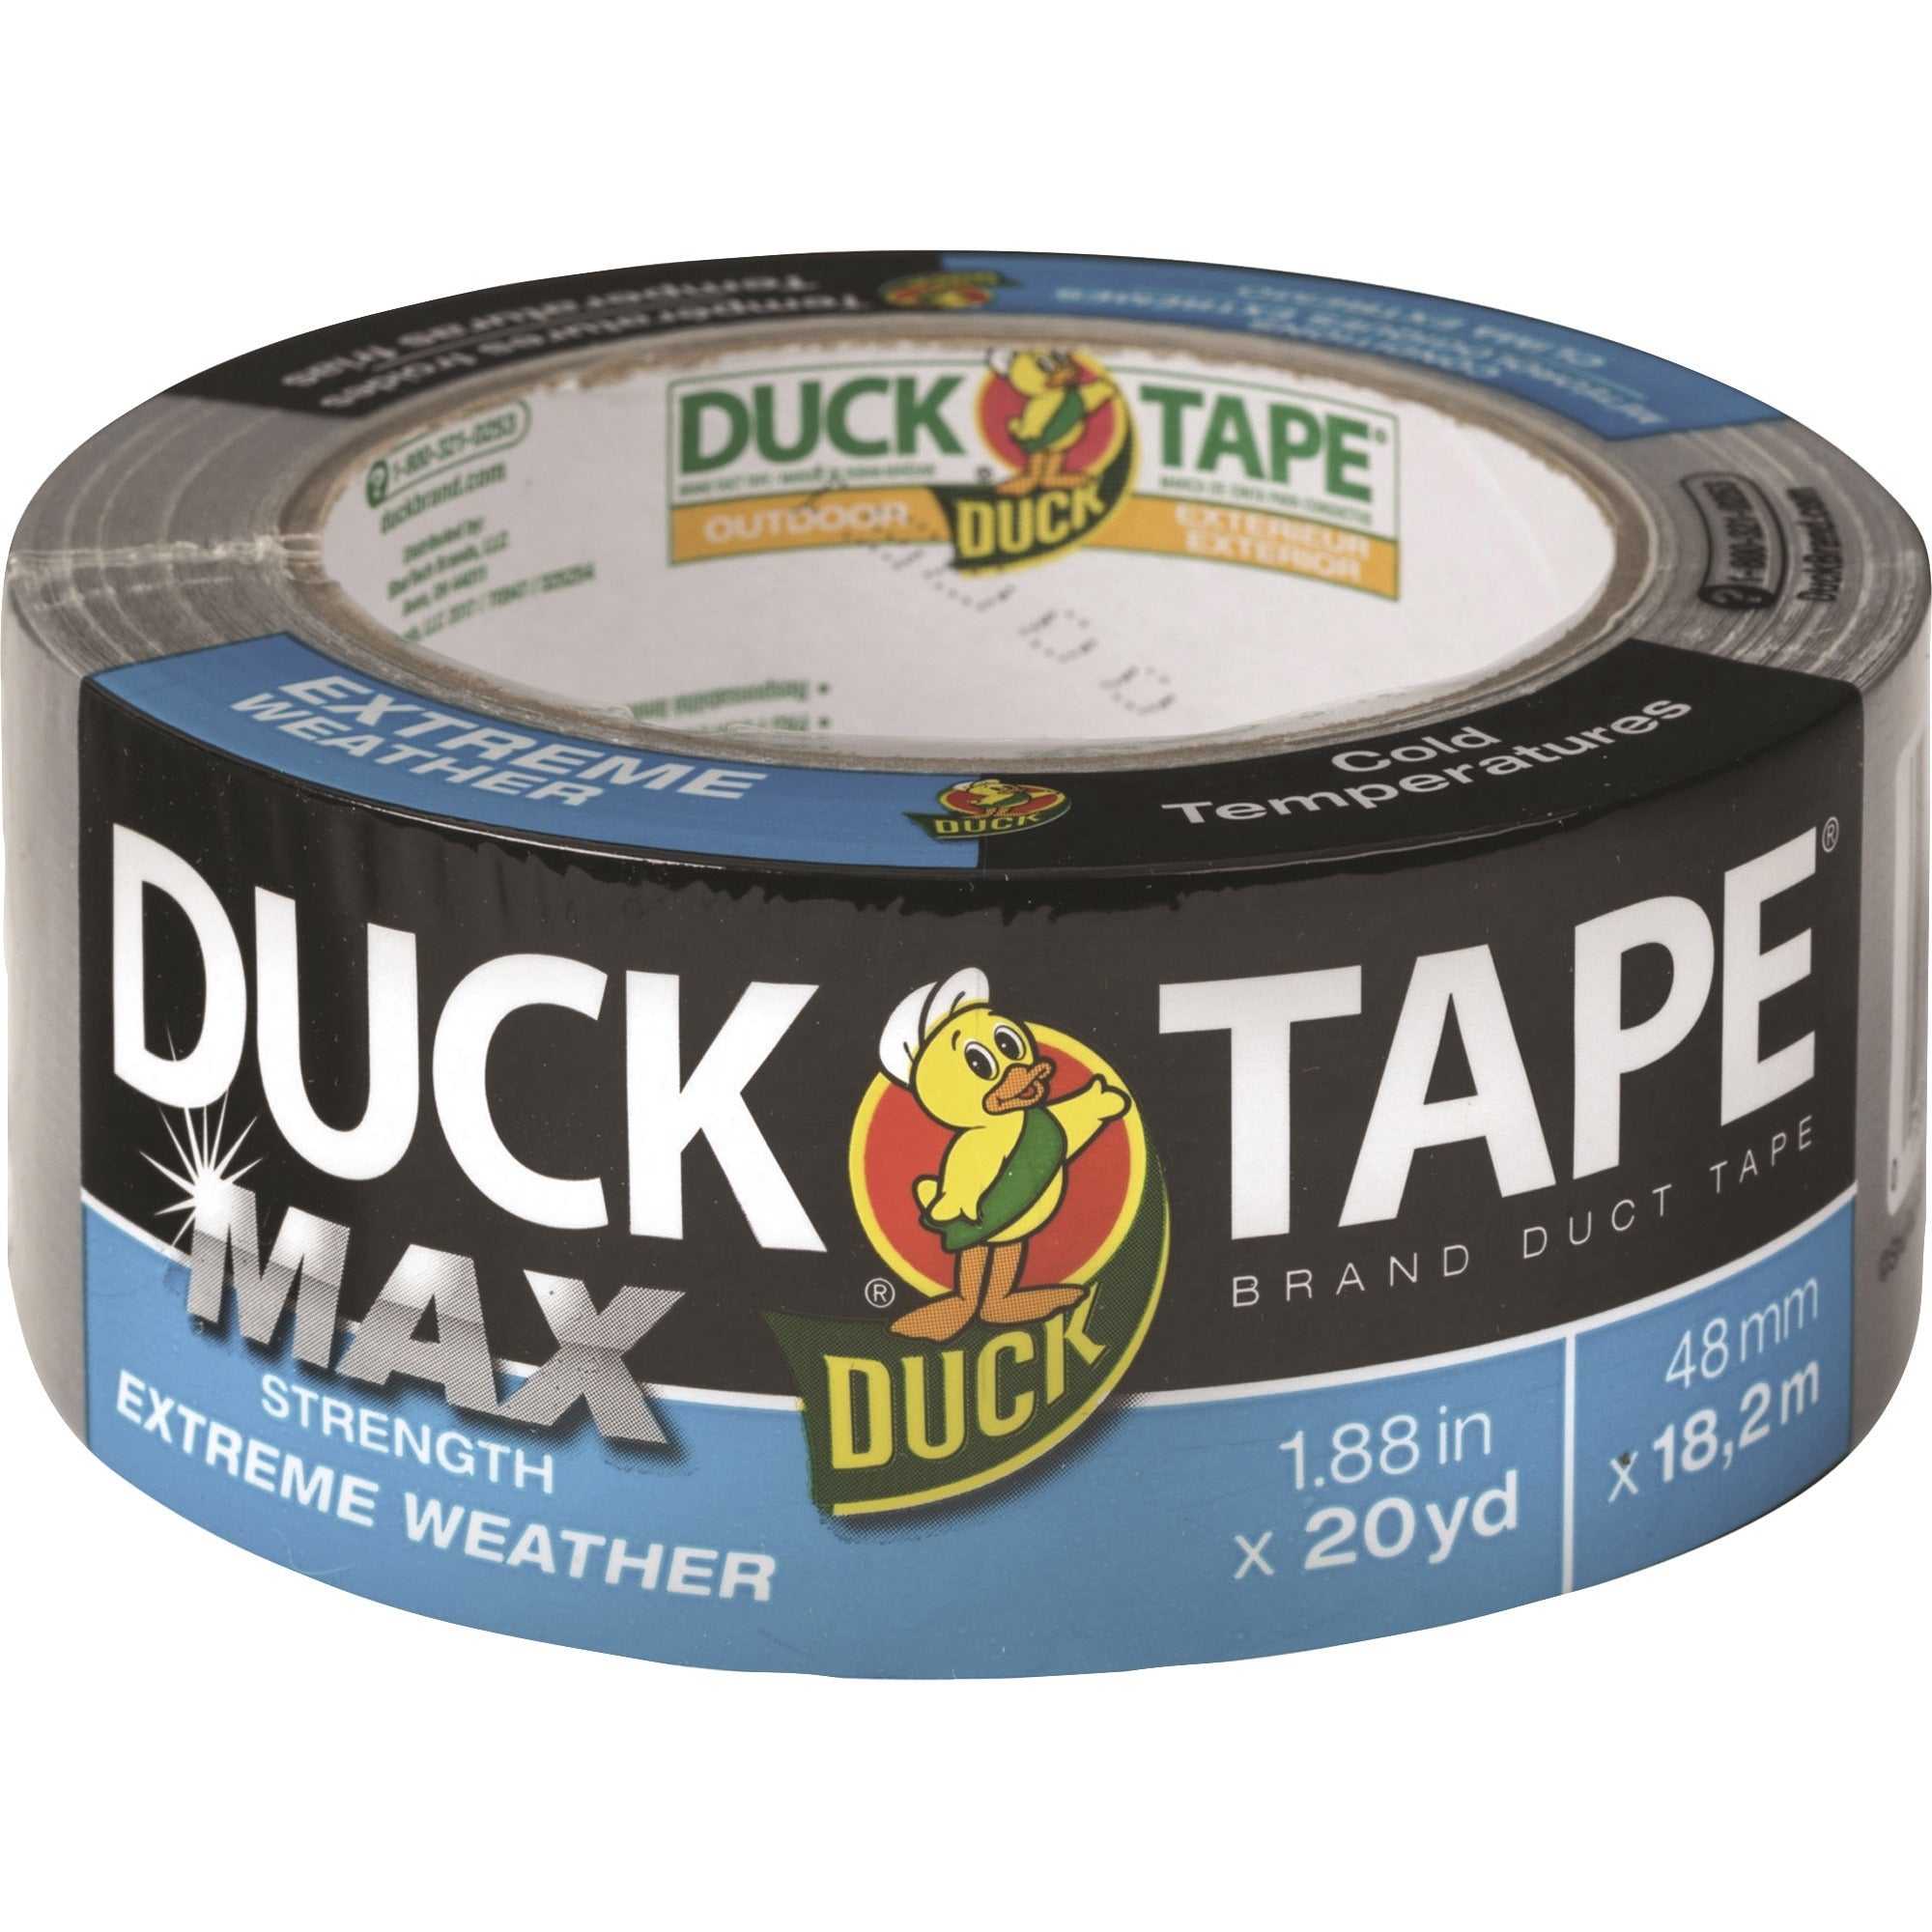 duck-max-strength-weather-duct-tape-20-yd-length-x-188-width-1-each-silver_duc241635 - 1